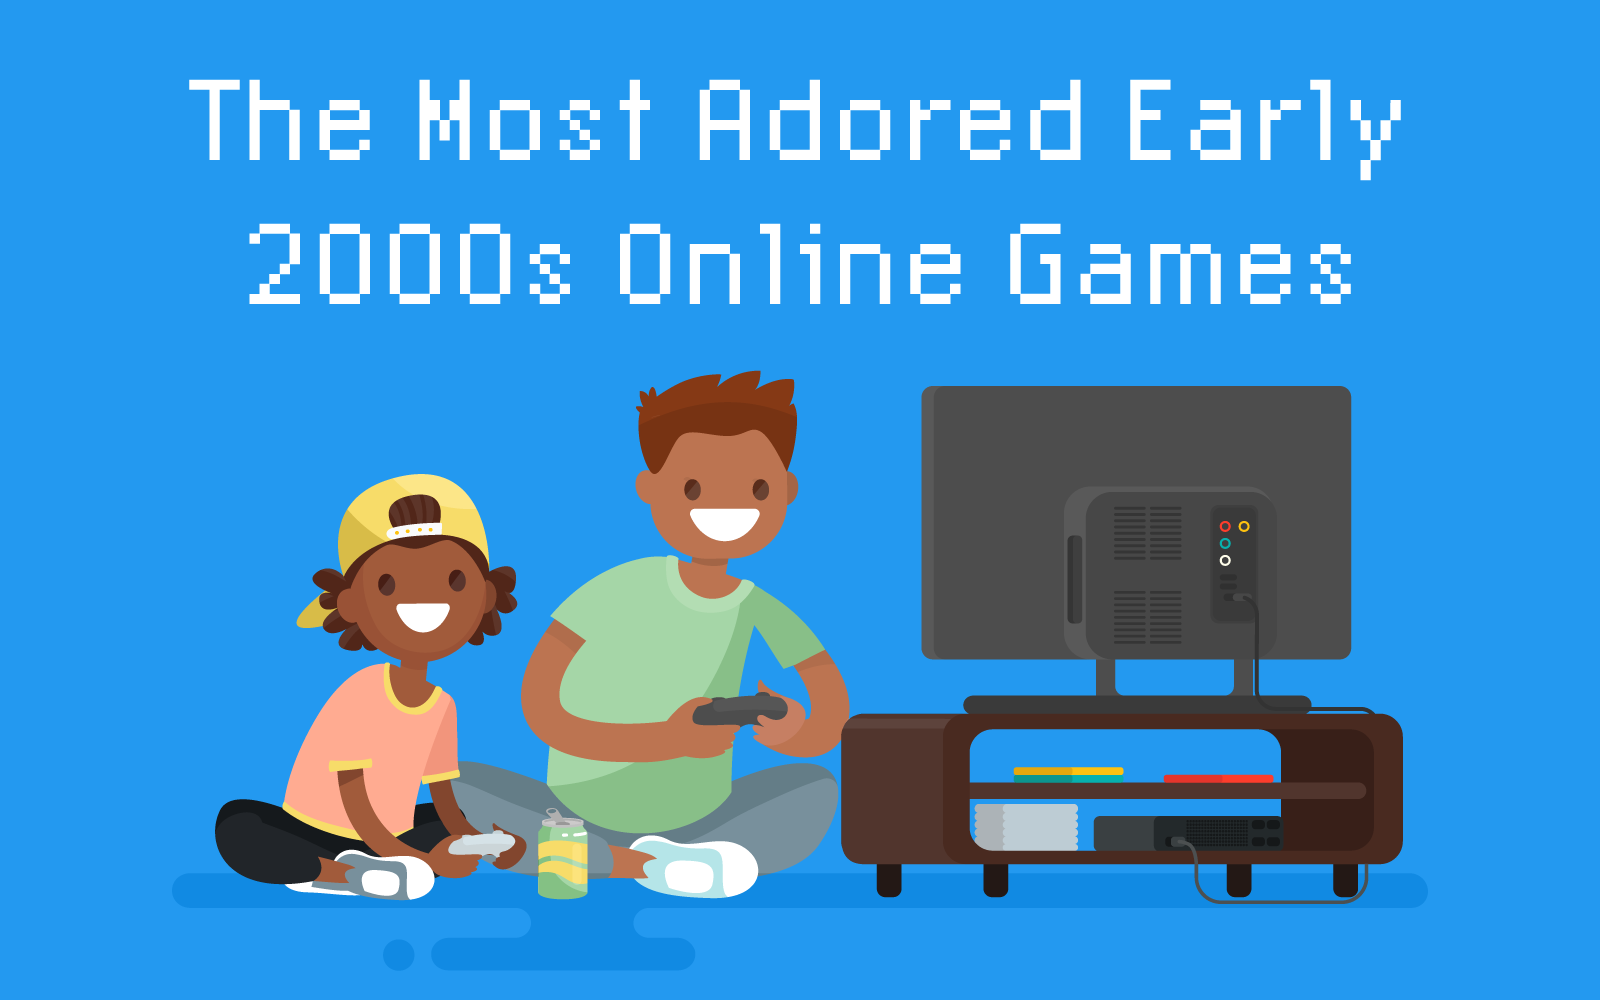 2000 Engaging Online Gaming App Names - And Their .com Domains